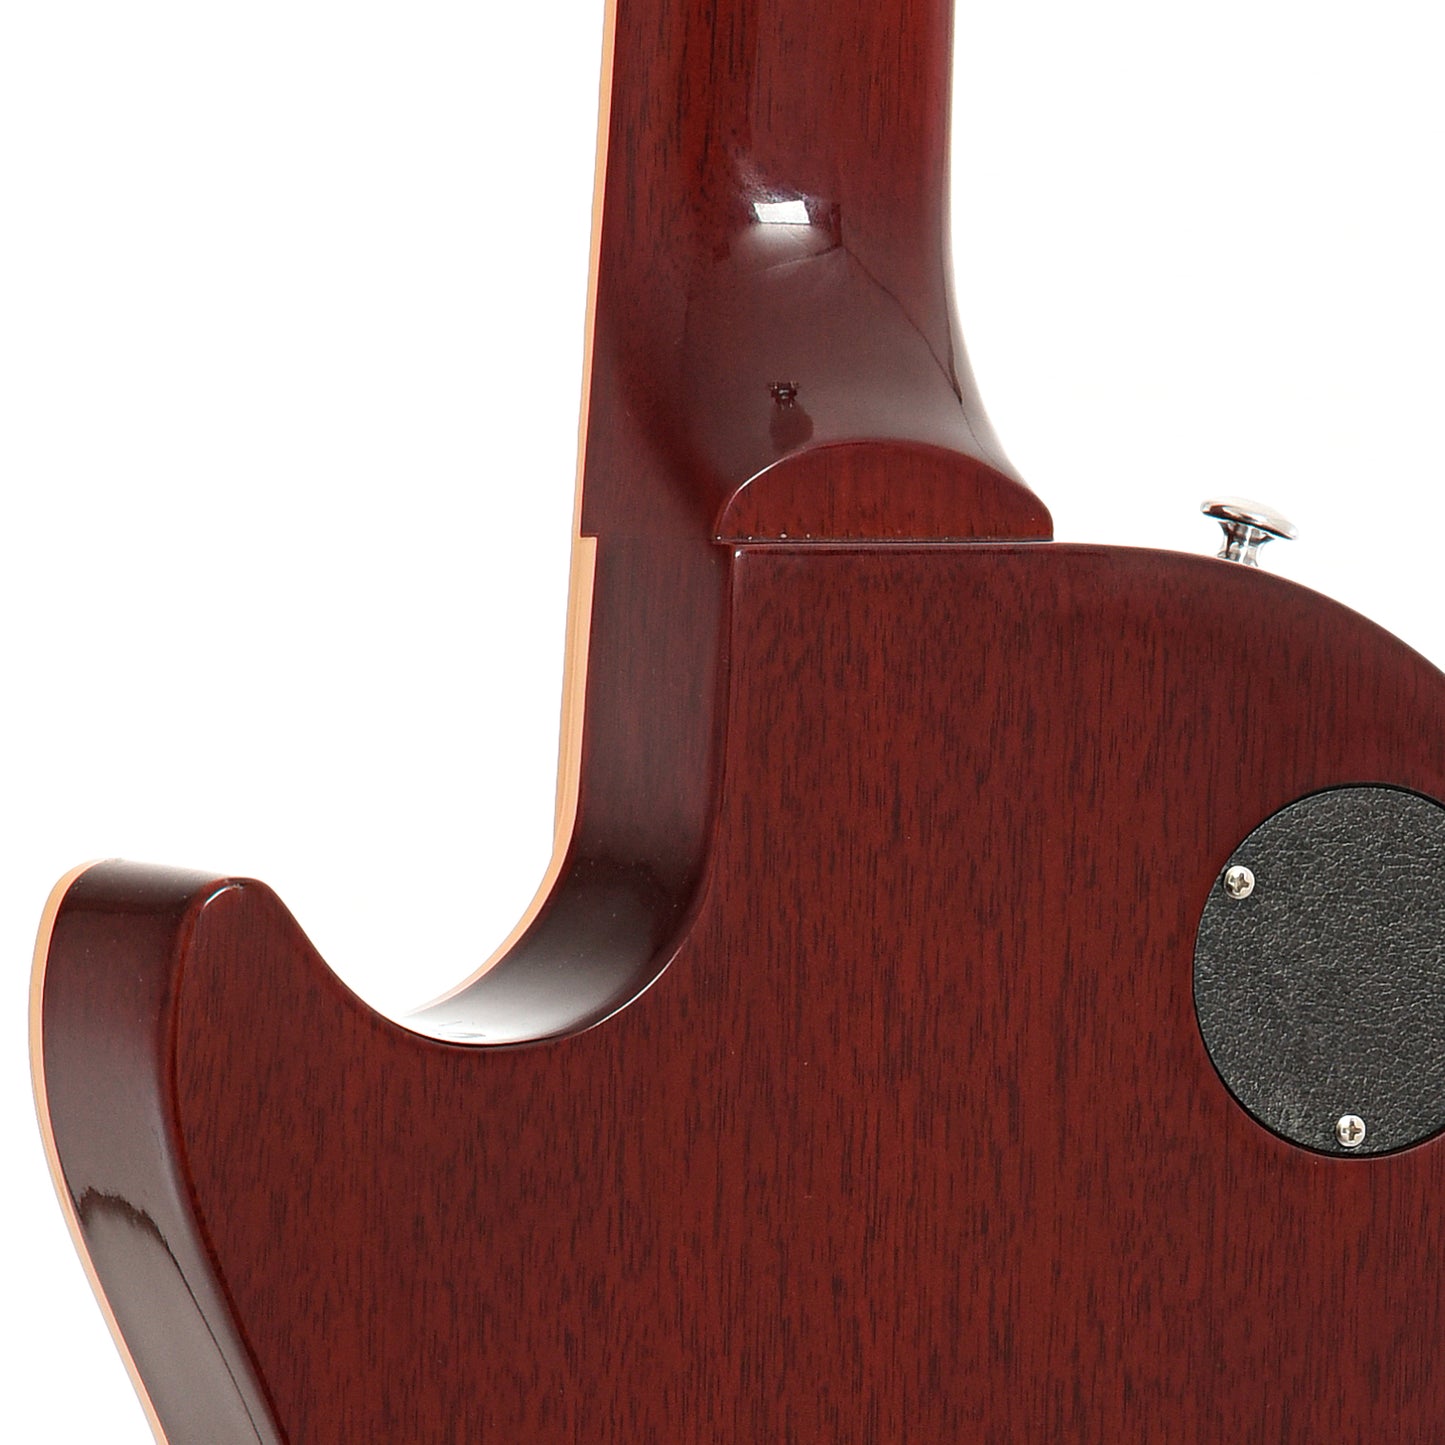 Neck joint of Gibson Les Paul Classic 100 